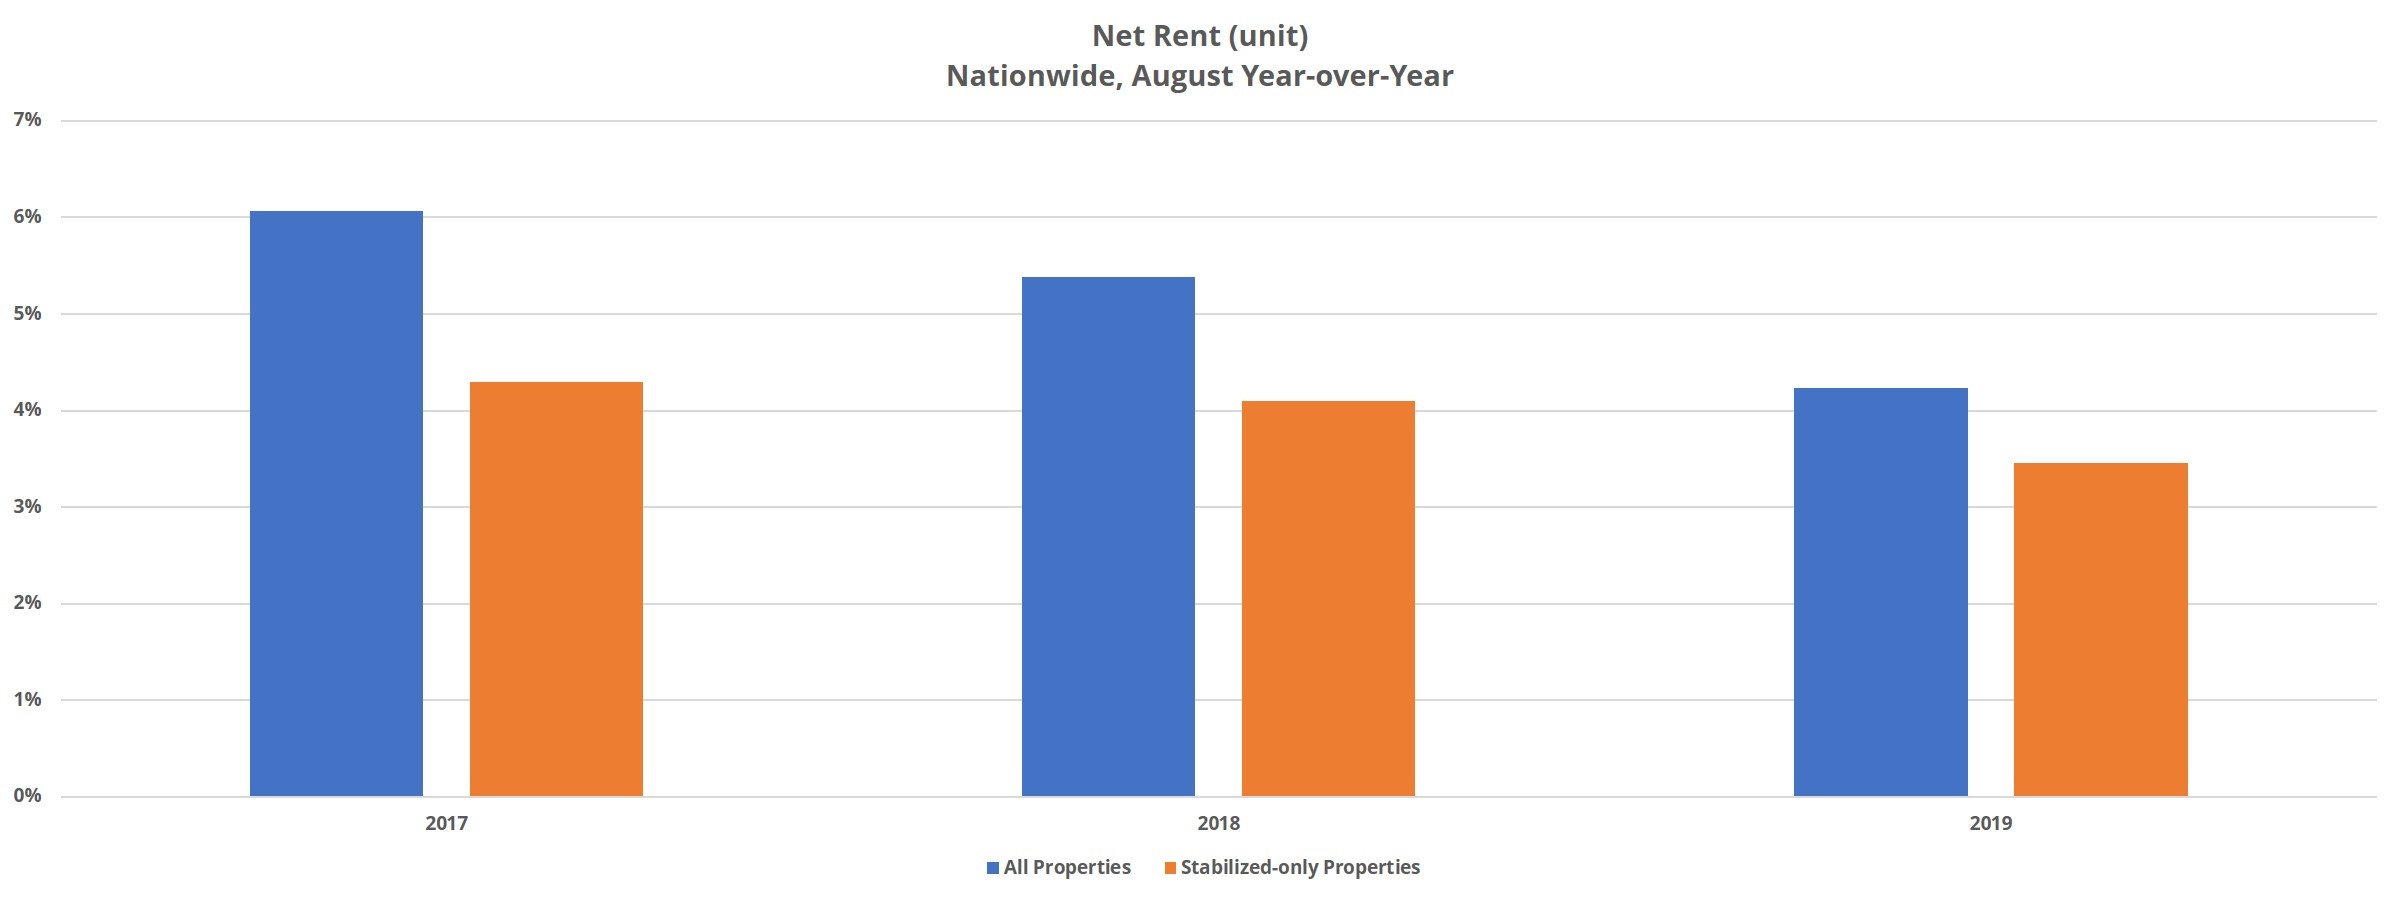 Net Rent (Unit) Nationwide August Year-Over-Year